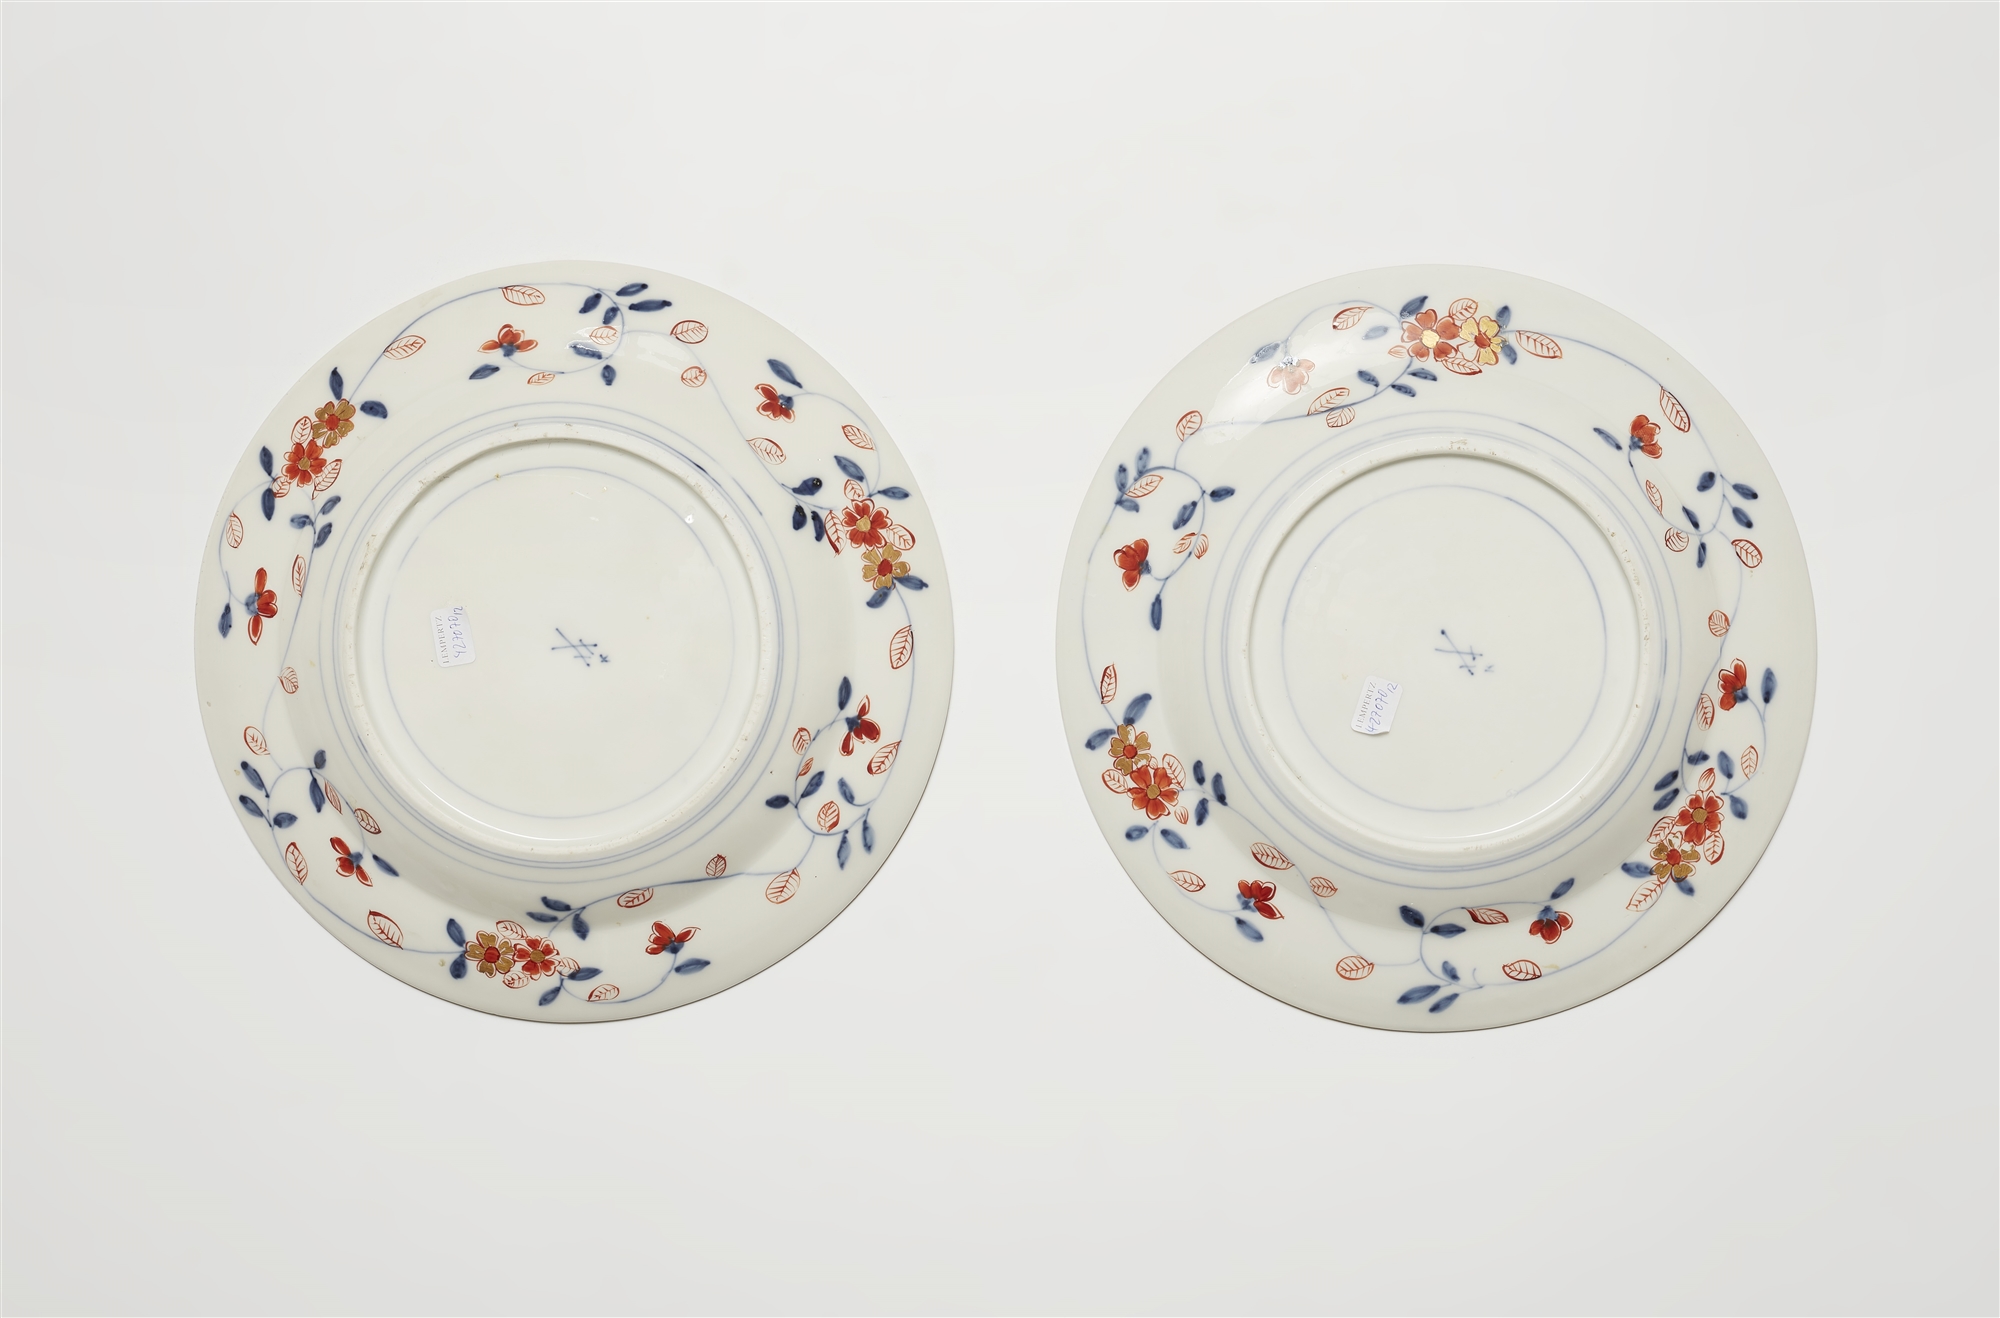 A pair of Meissen porcelain plates with rare Imari decor - Image 2 of 2